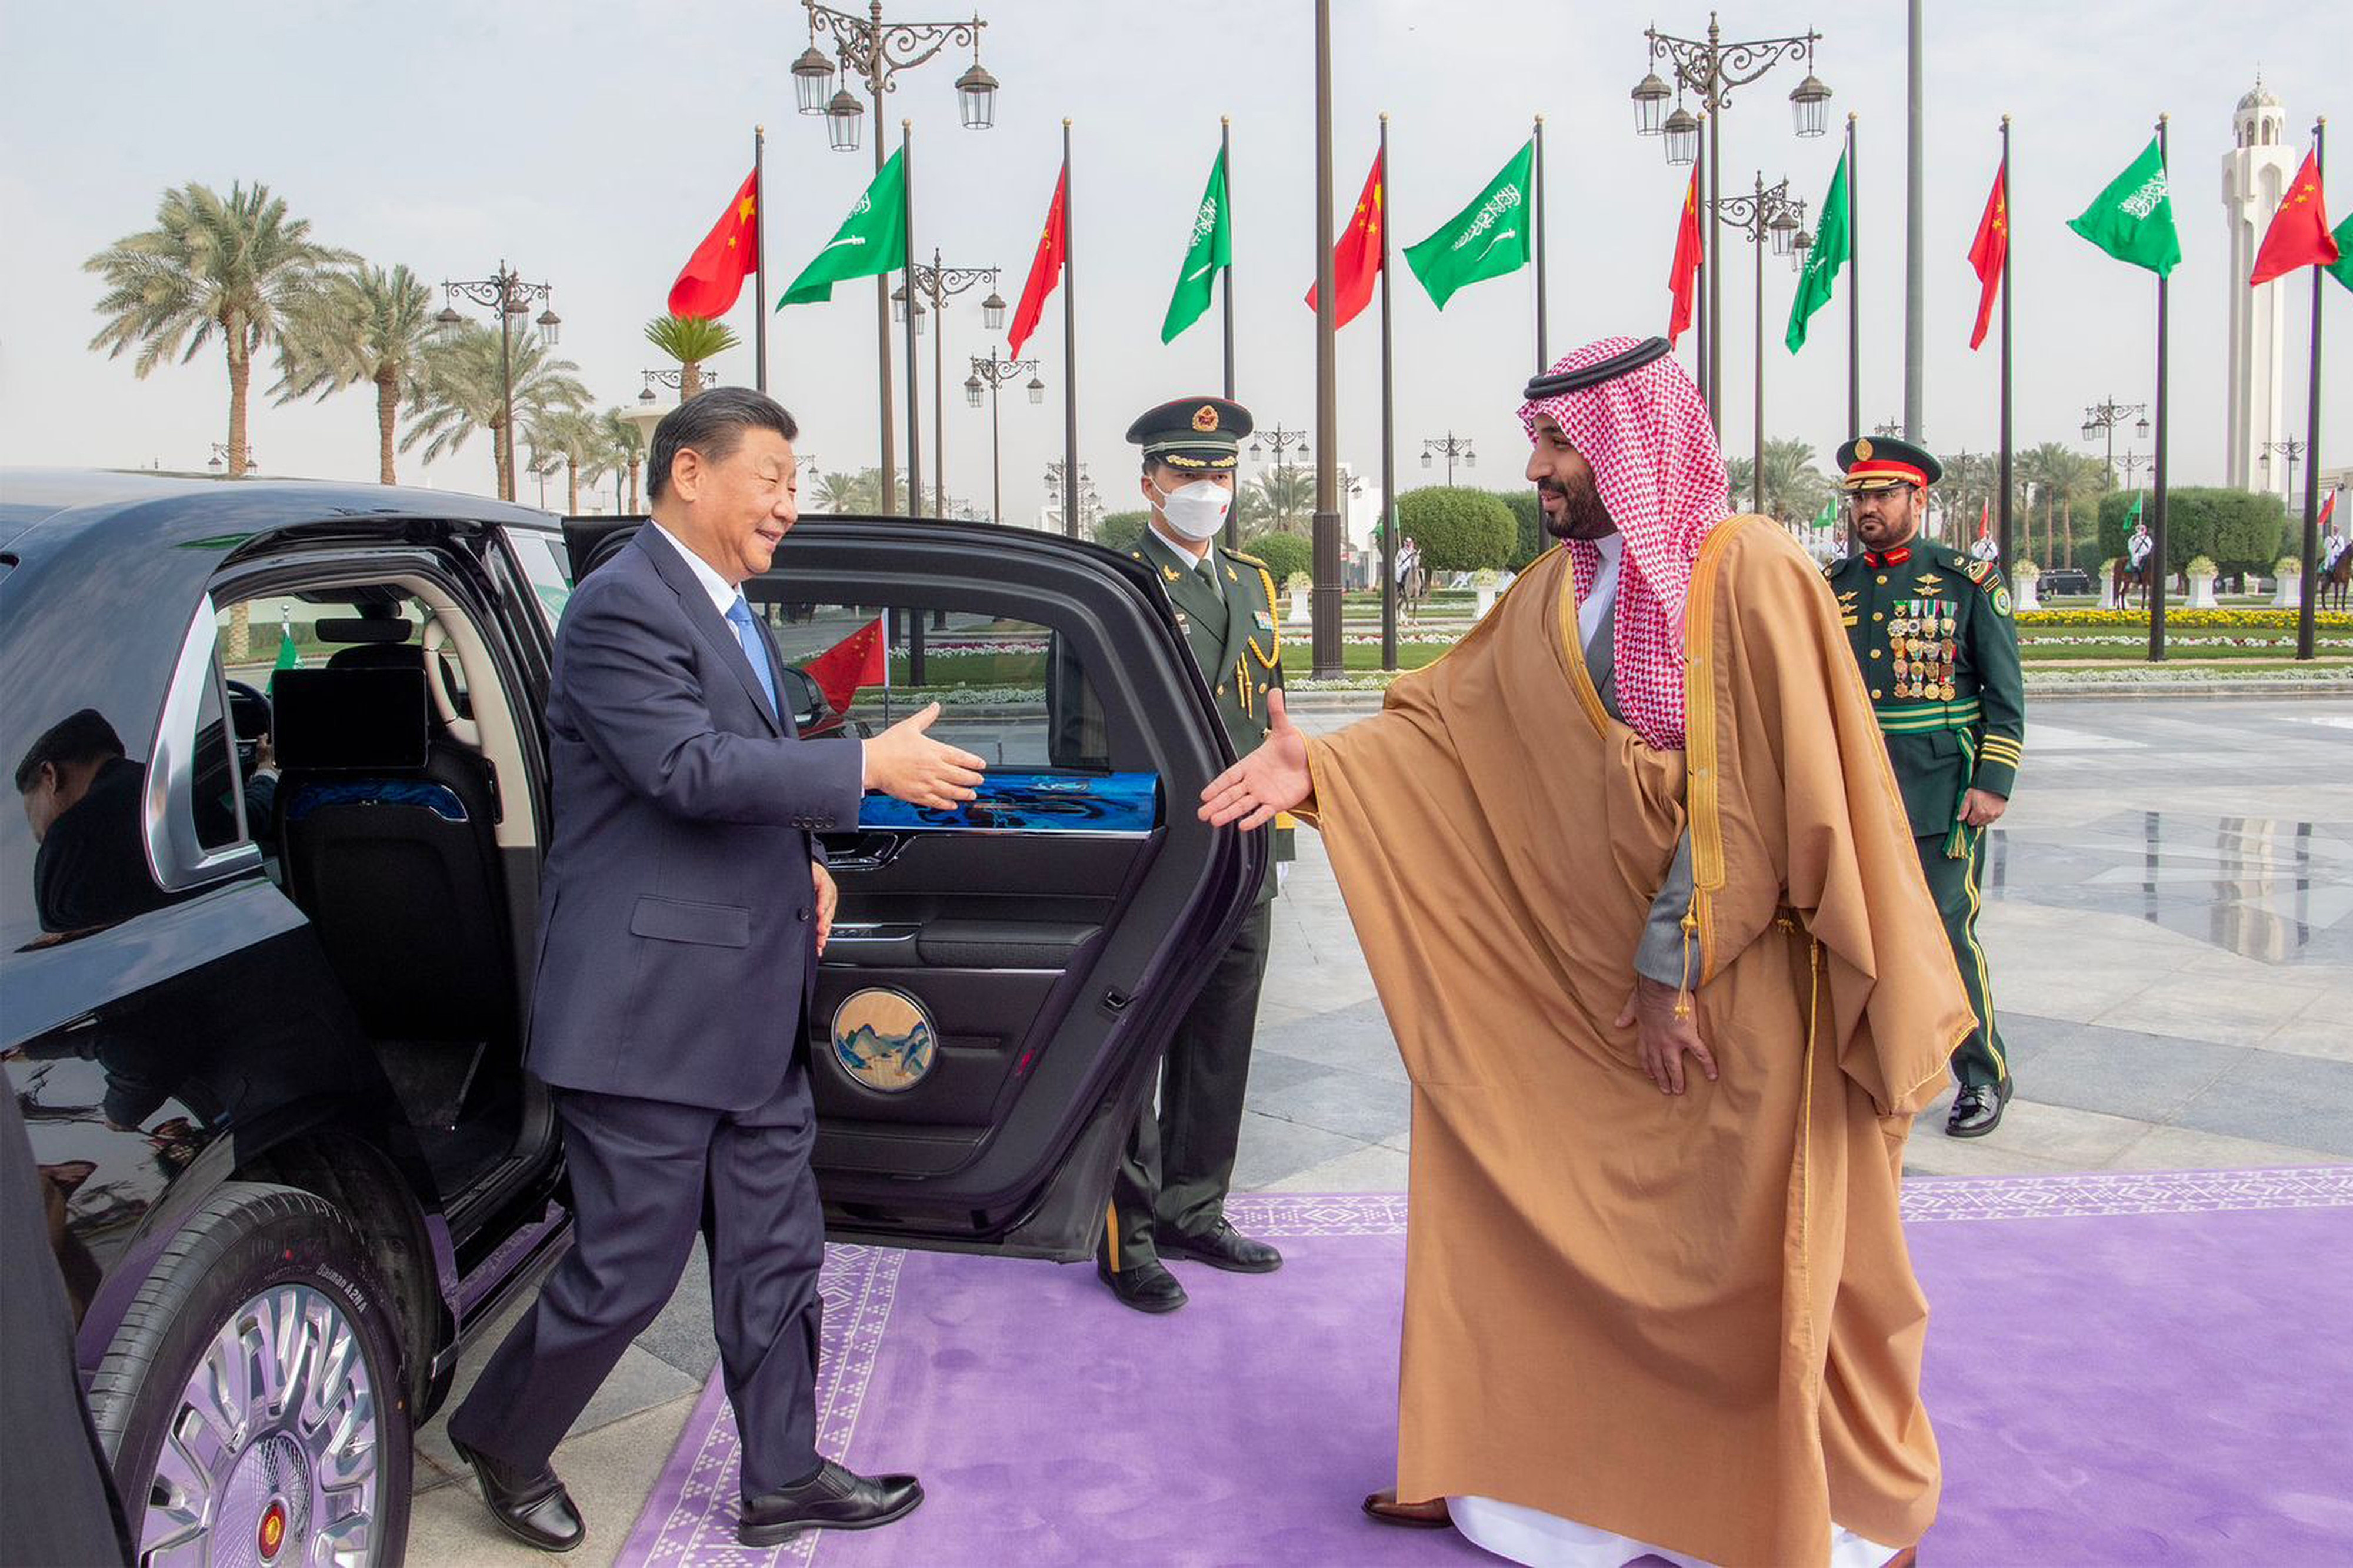 Chinese President Xi Jinping (left) shakes hands with Saudi Crown Prince and Prime Minister Mohammed bin Salman outside the al-Yamama Palace, in Riyadh, Saudi Arabia, on December 8, 2022. Photo: Saudi Press Agency/ AP